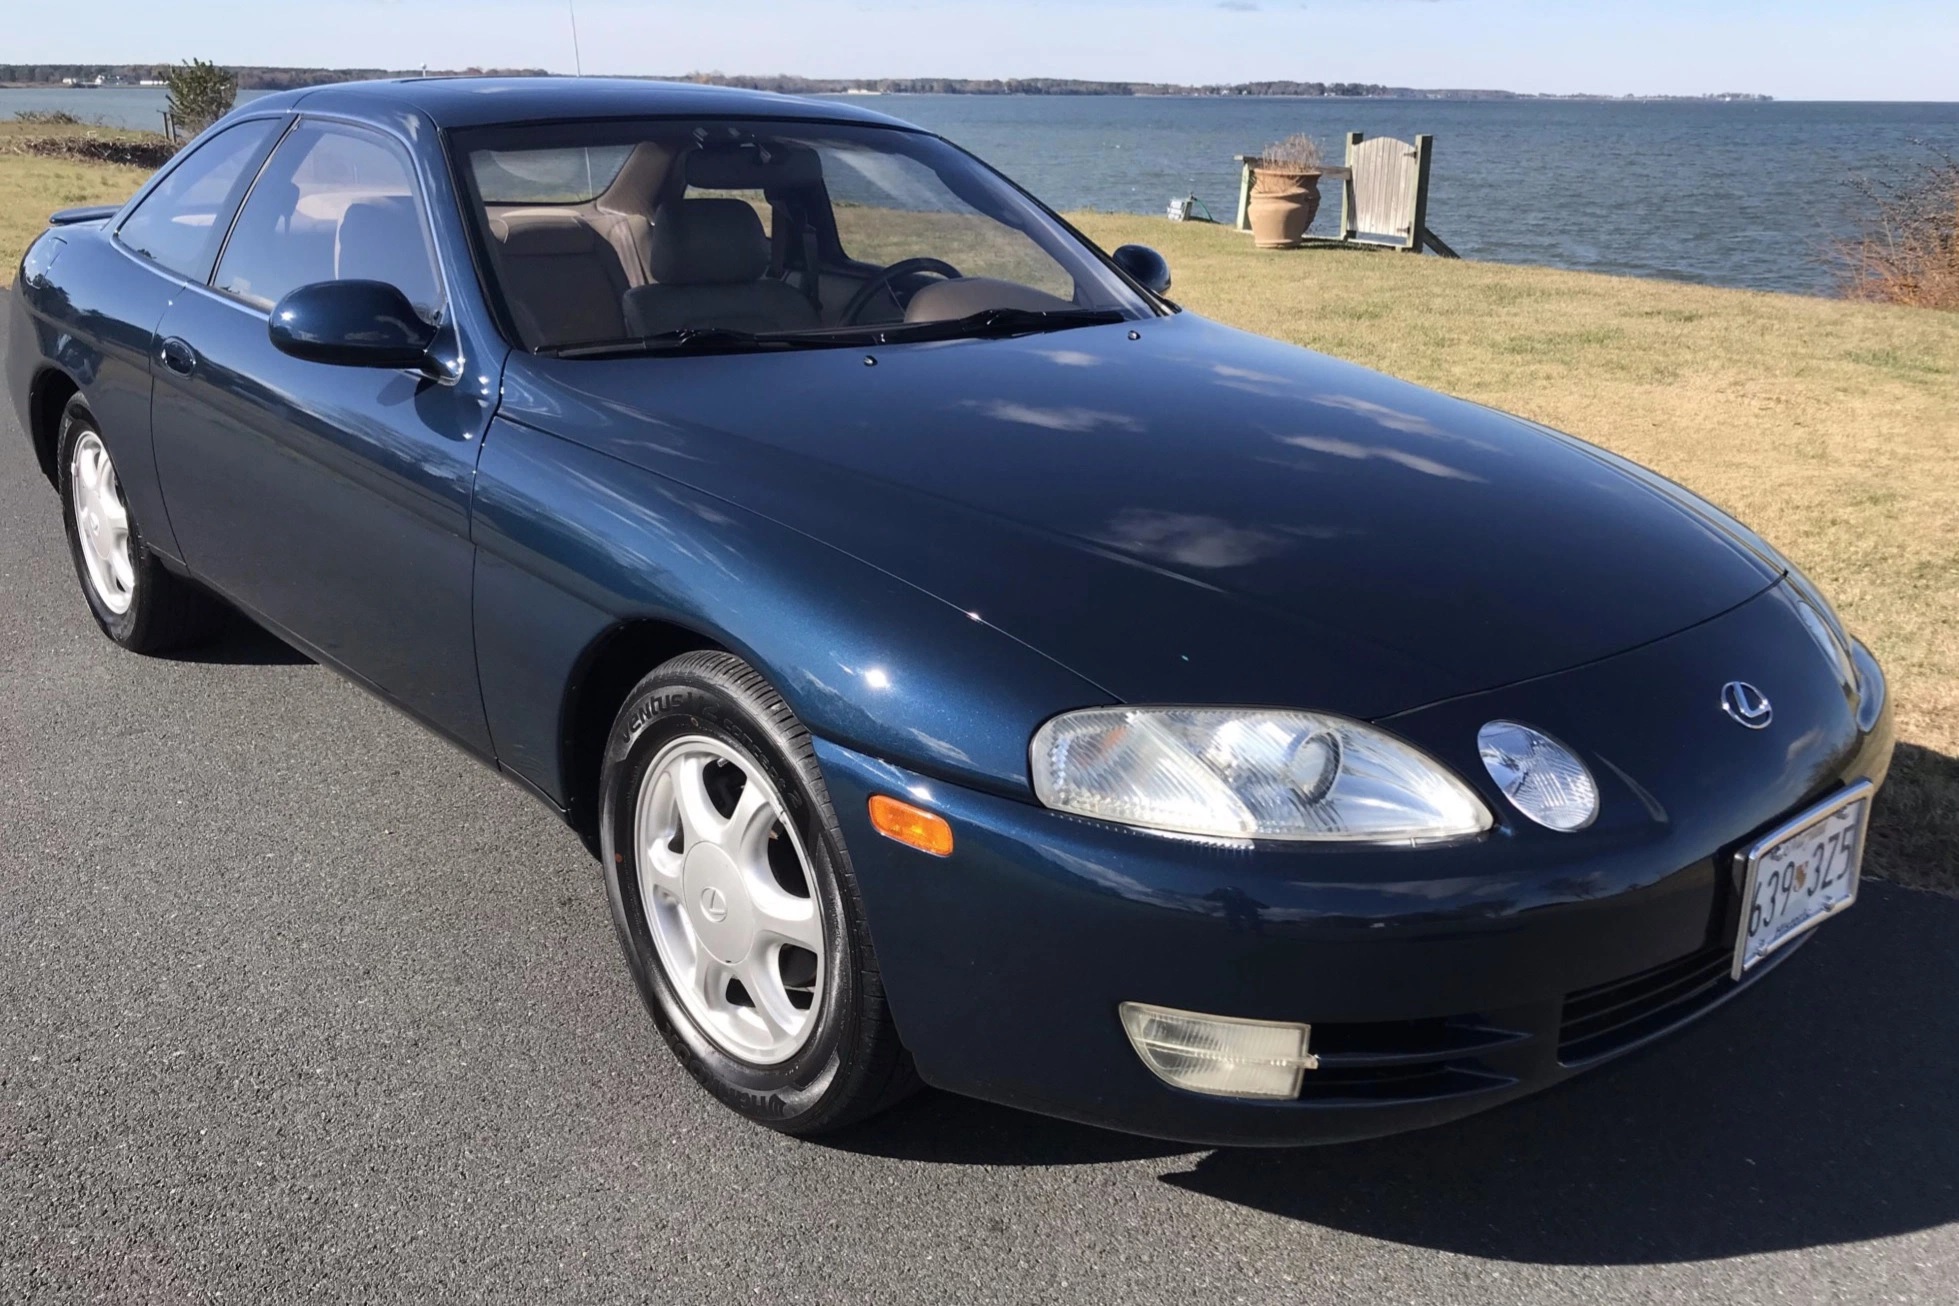 A blue Lexus SC300 coupe at the waterfront